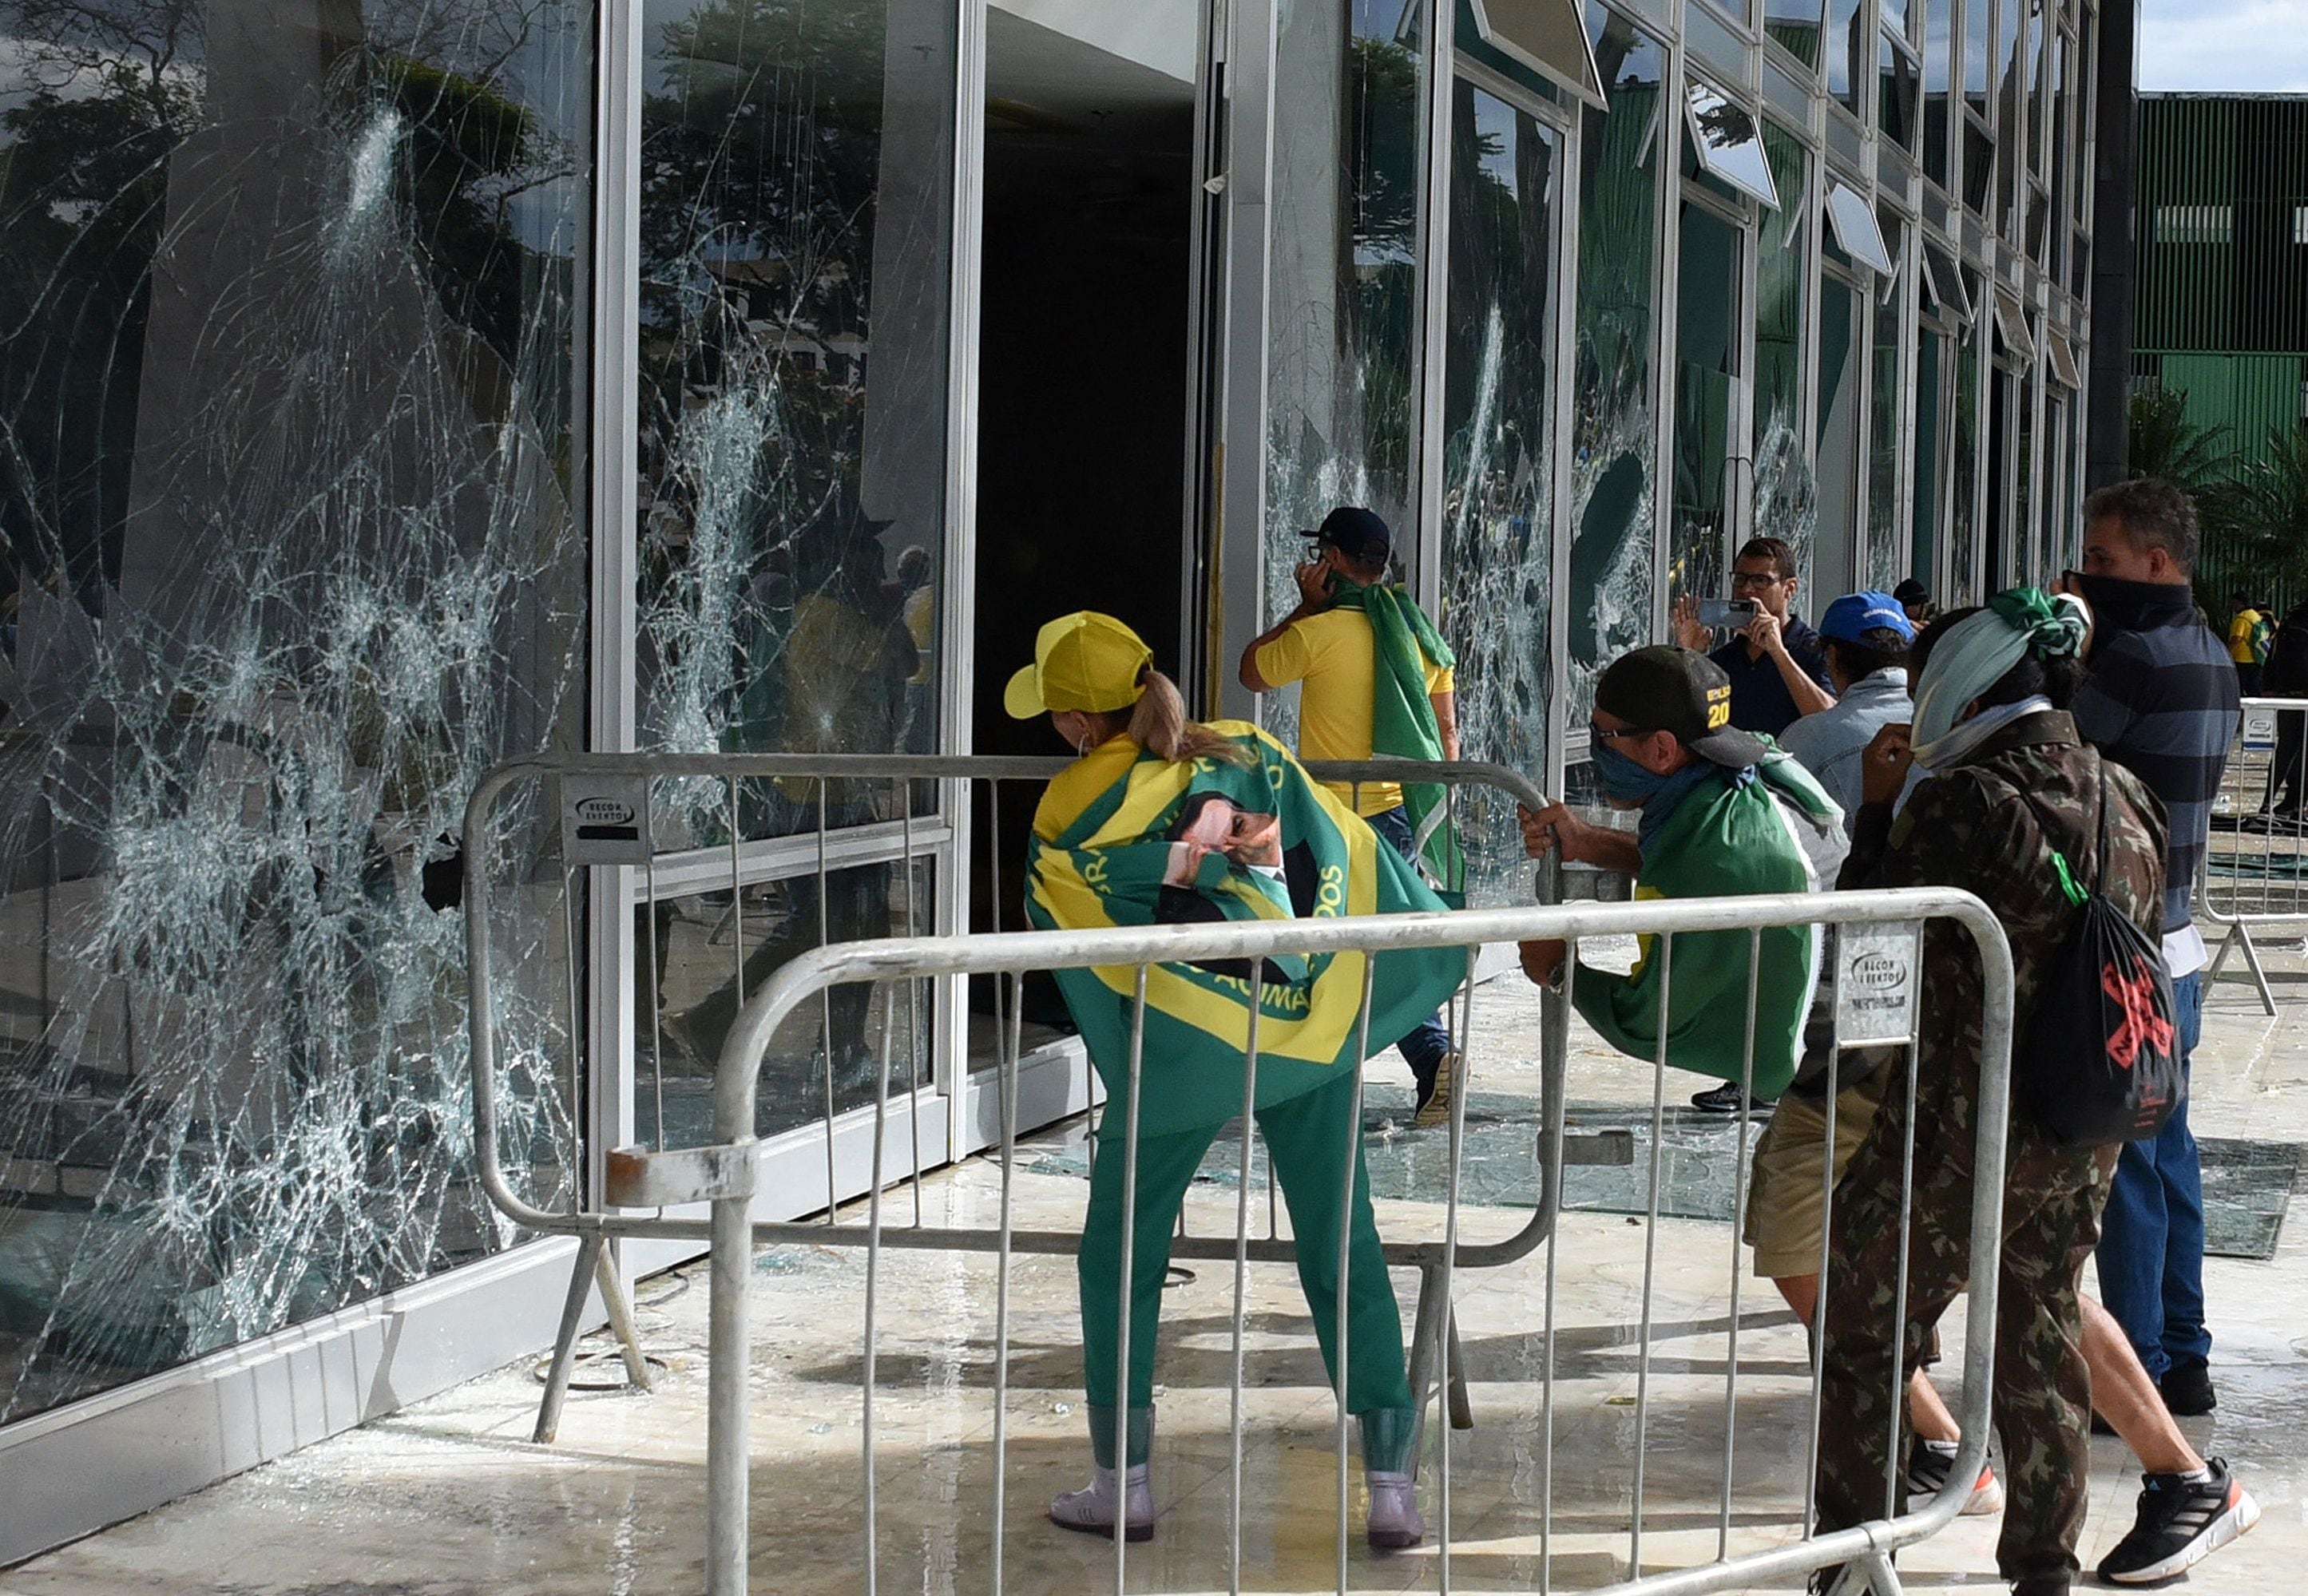 Supporters of former Brazilian president Jair Bolsonaro destroy a window of the Federal Supreme Court in Brasília on January 8, 2023. (Photo Ton MOLINA / AFP).